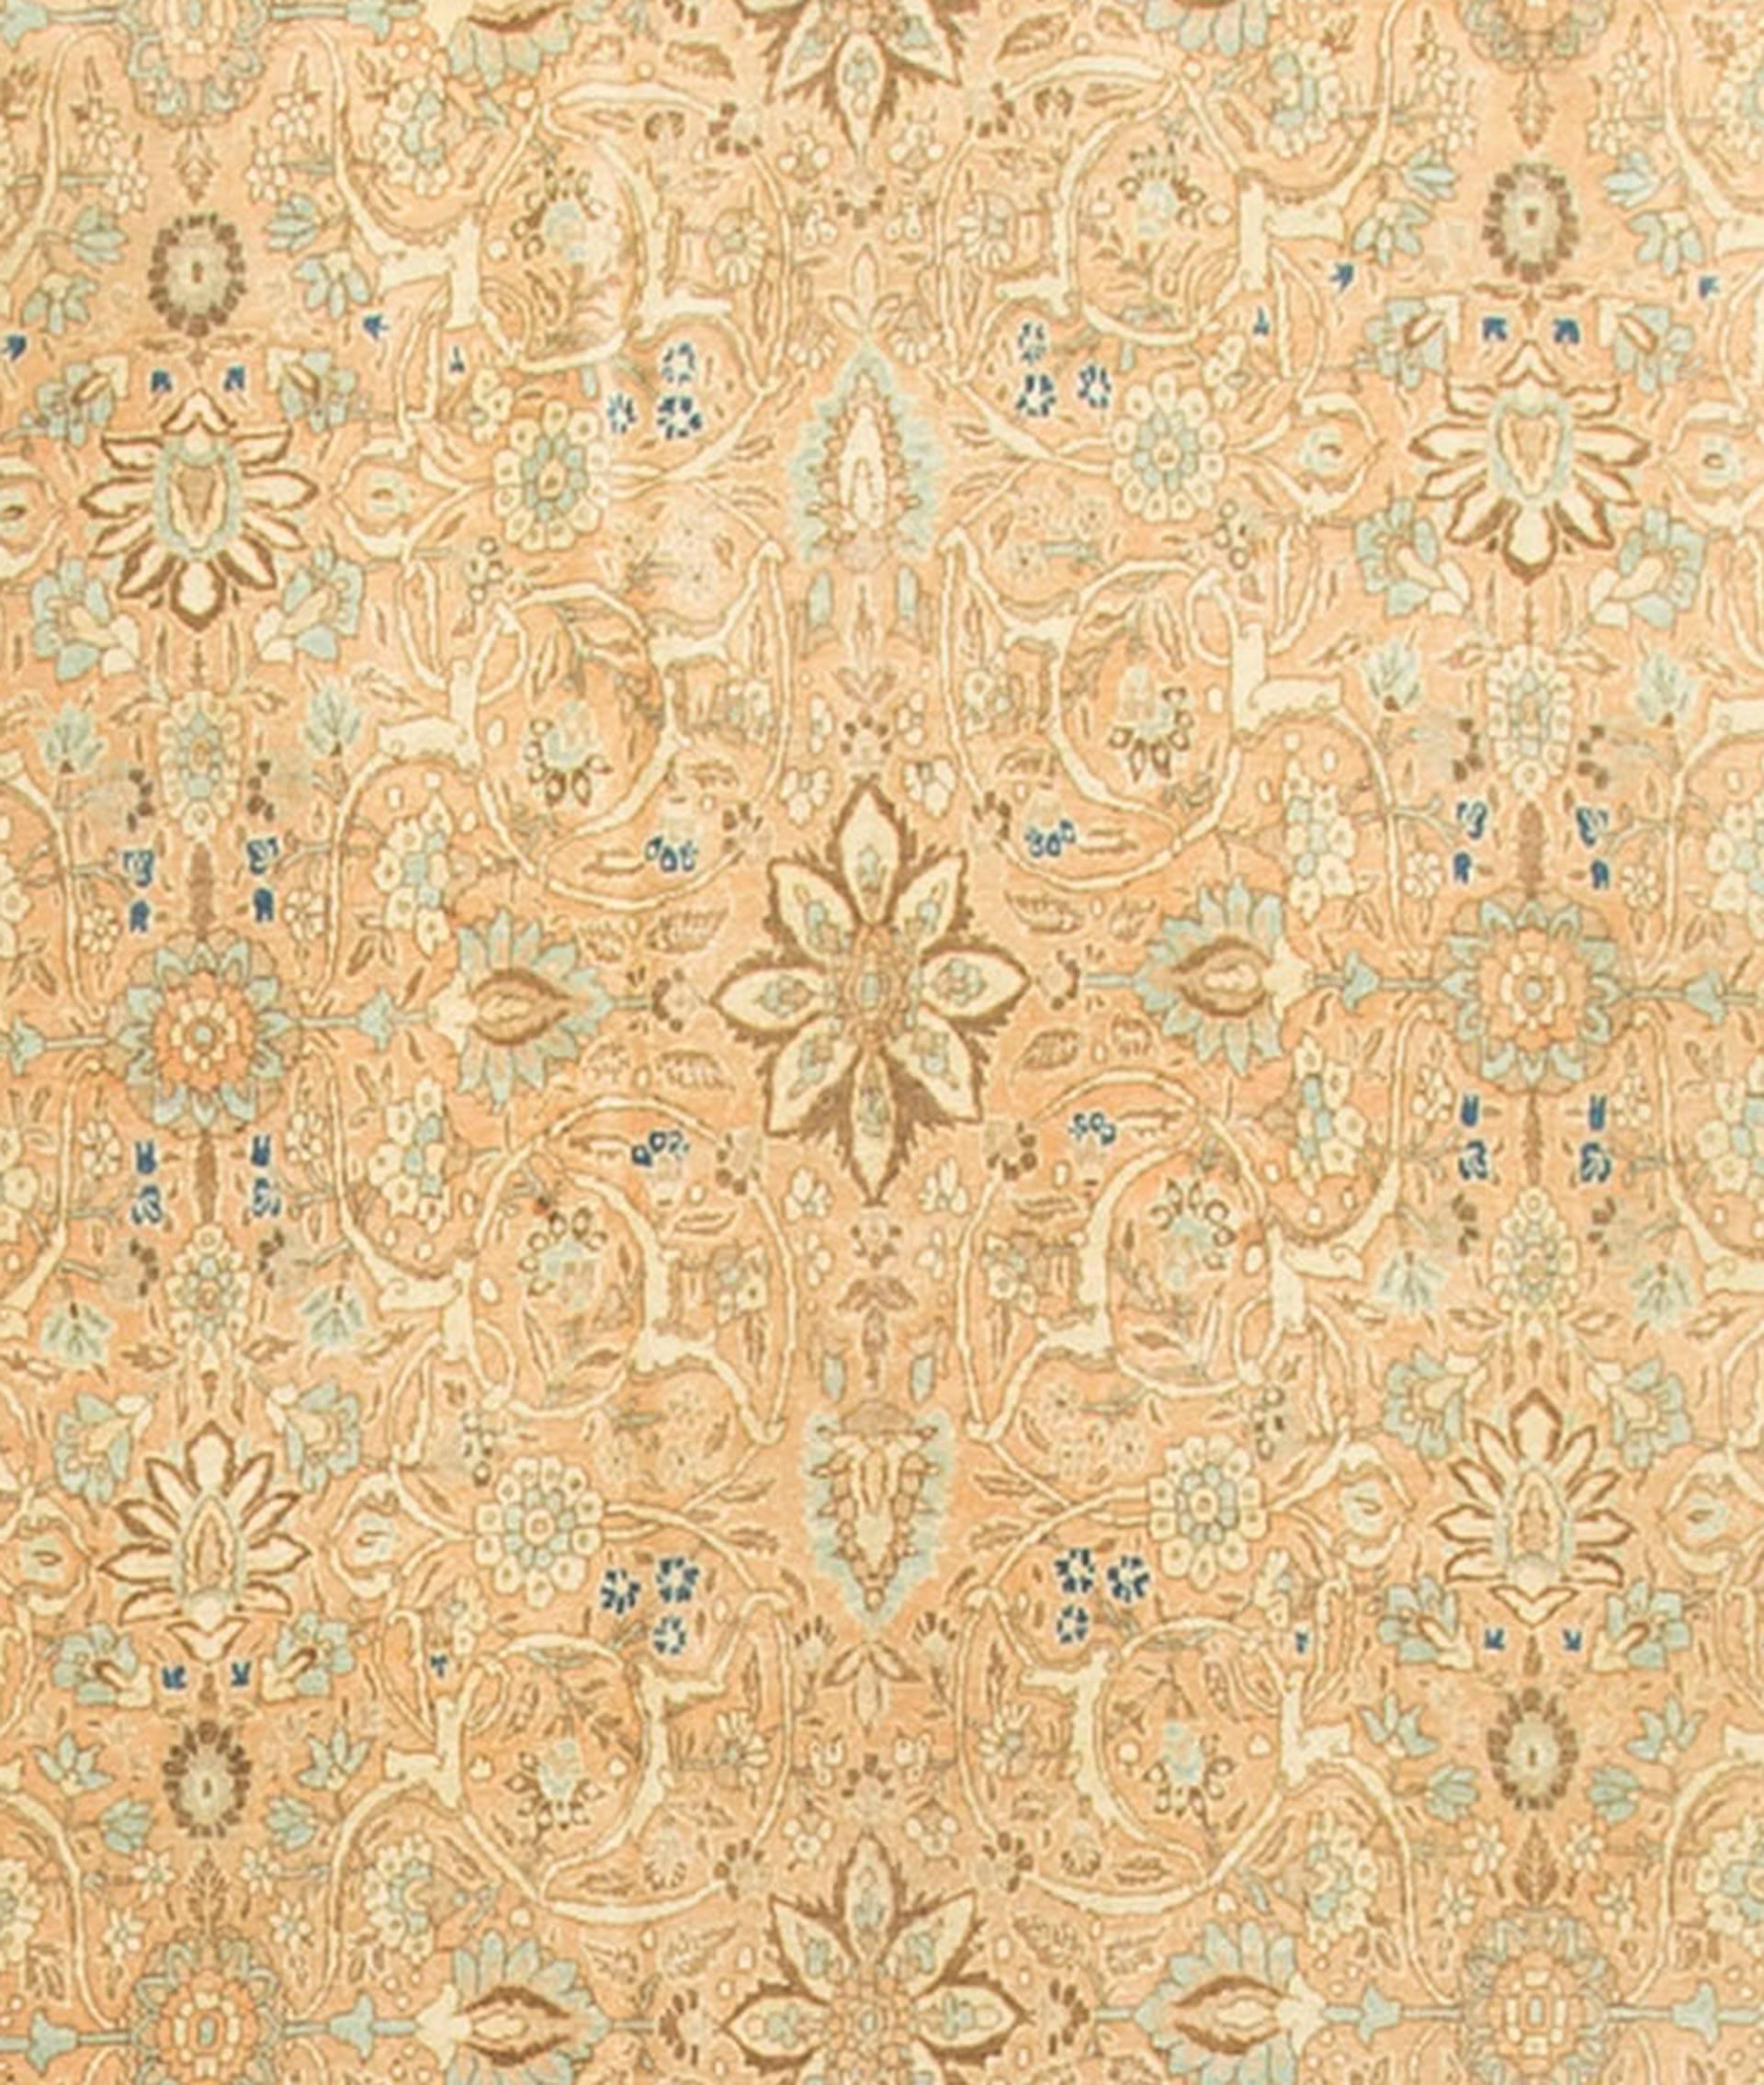 Antique Persian Tabriz Rug Carpet Circa 1900. This soft and gentle looking rug has a wonderful patina that only comes with age. The soft colors in the main ground and border complimented by floral motifs helps give the rug a sense of quiet